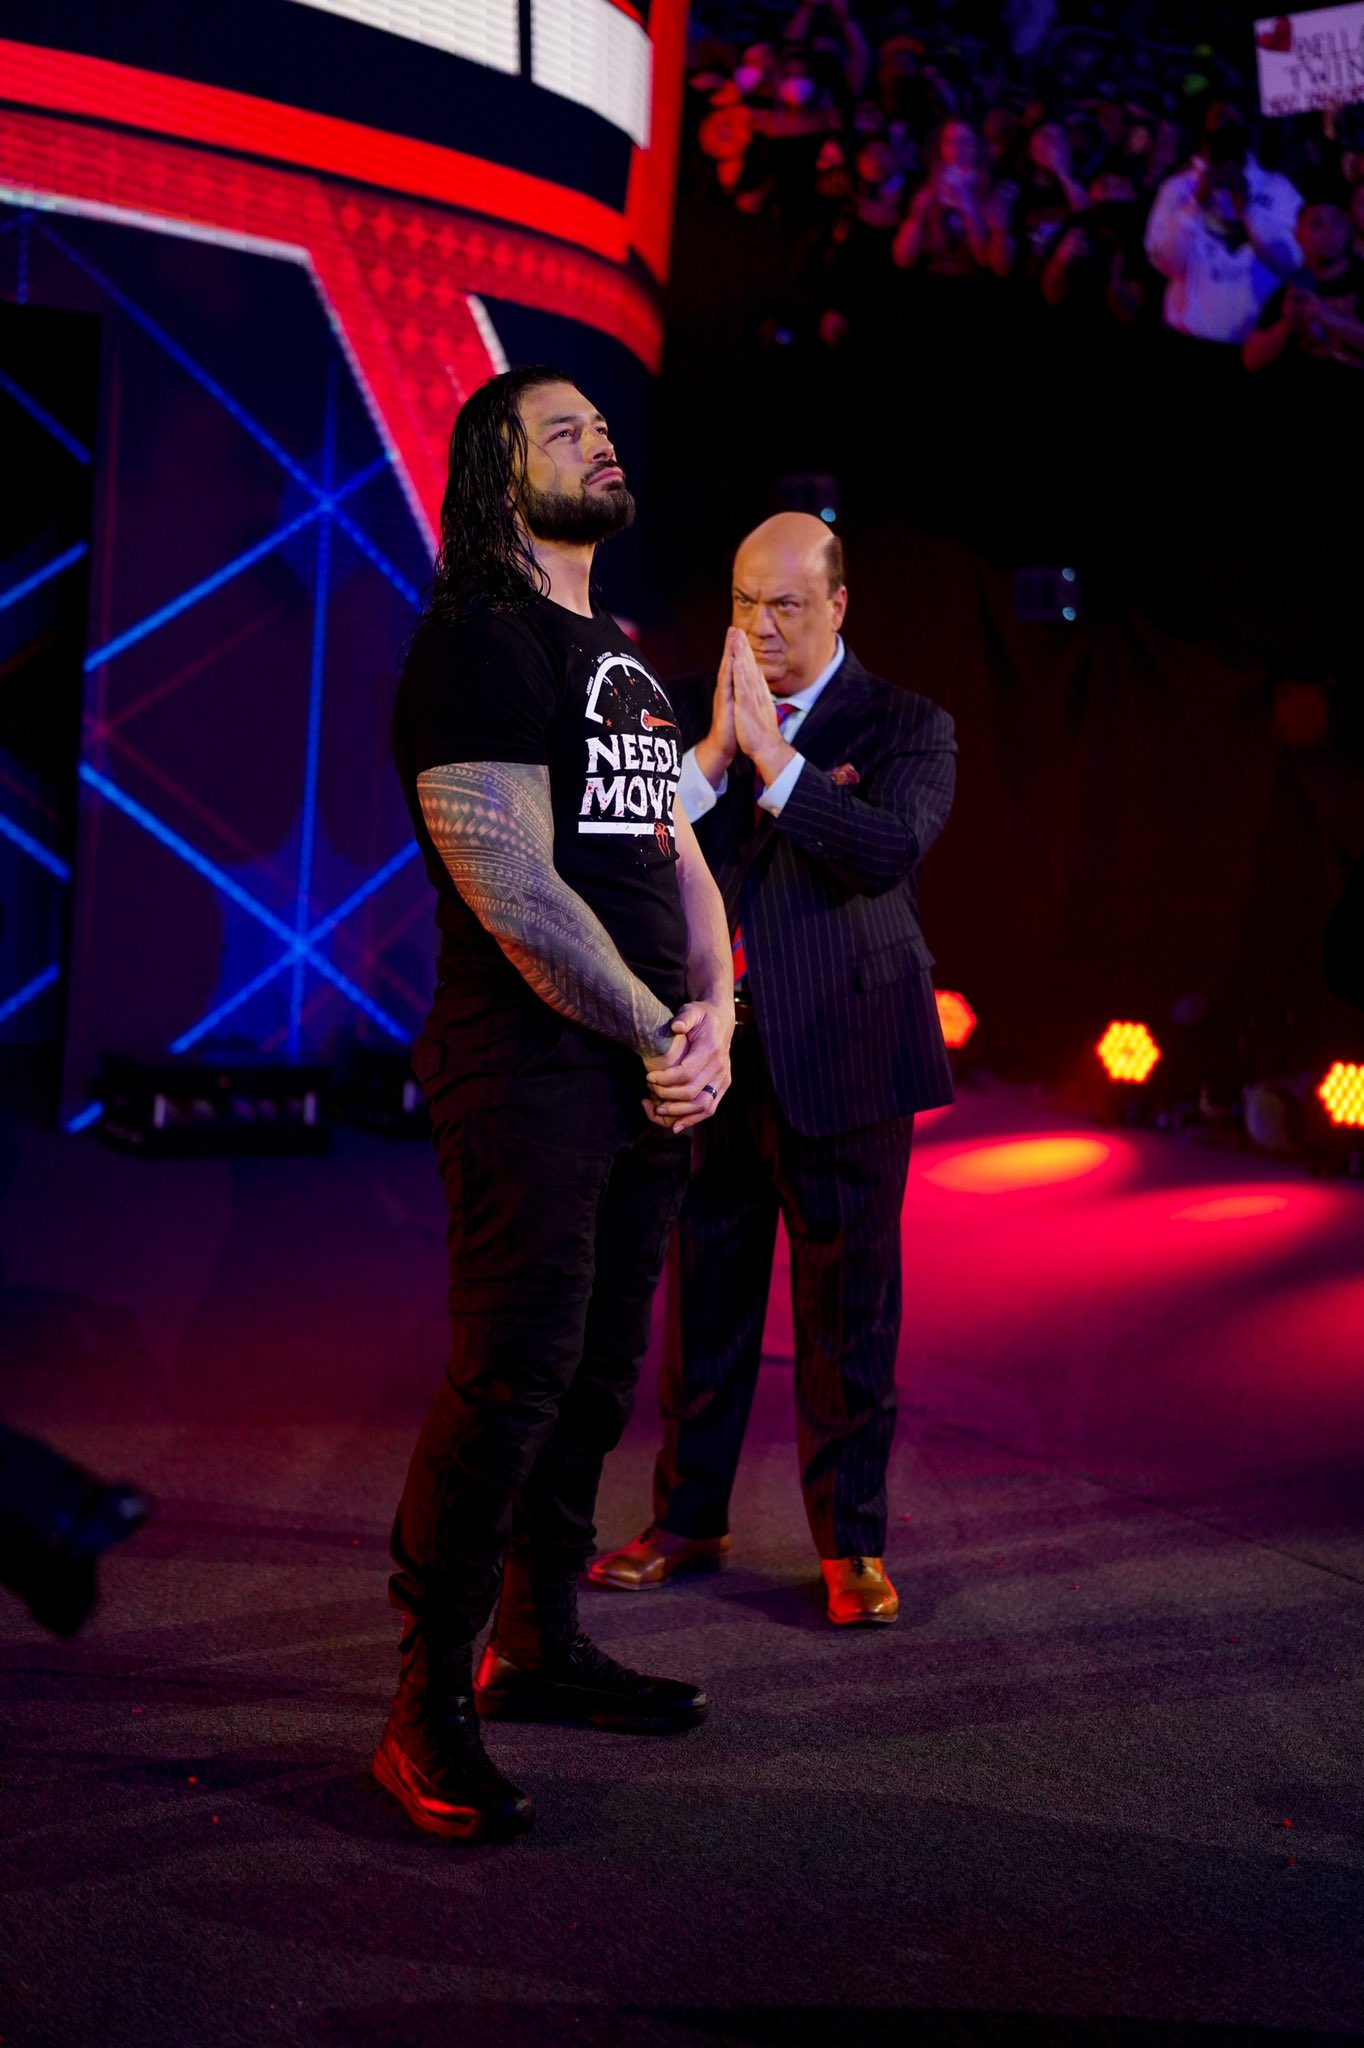 Roman Reigns and Paul Heyman leaving Royal Rumble 2022 after attacking Brock Lesnar